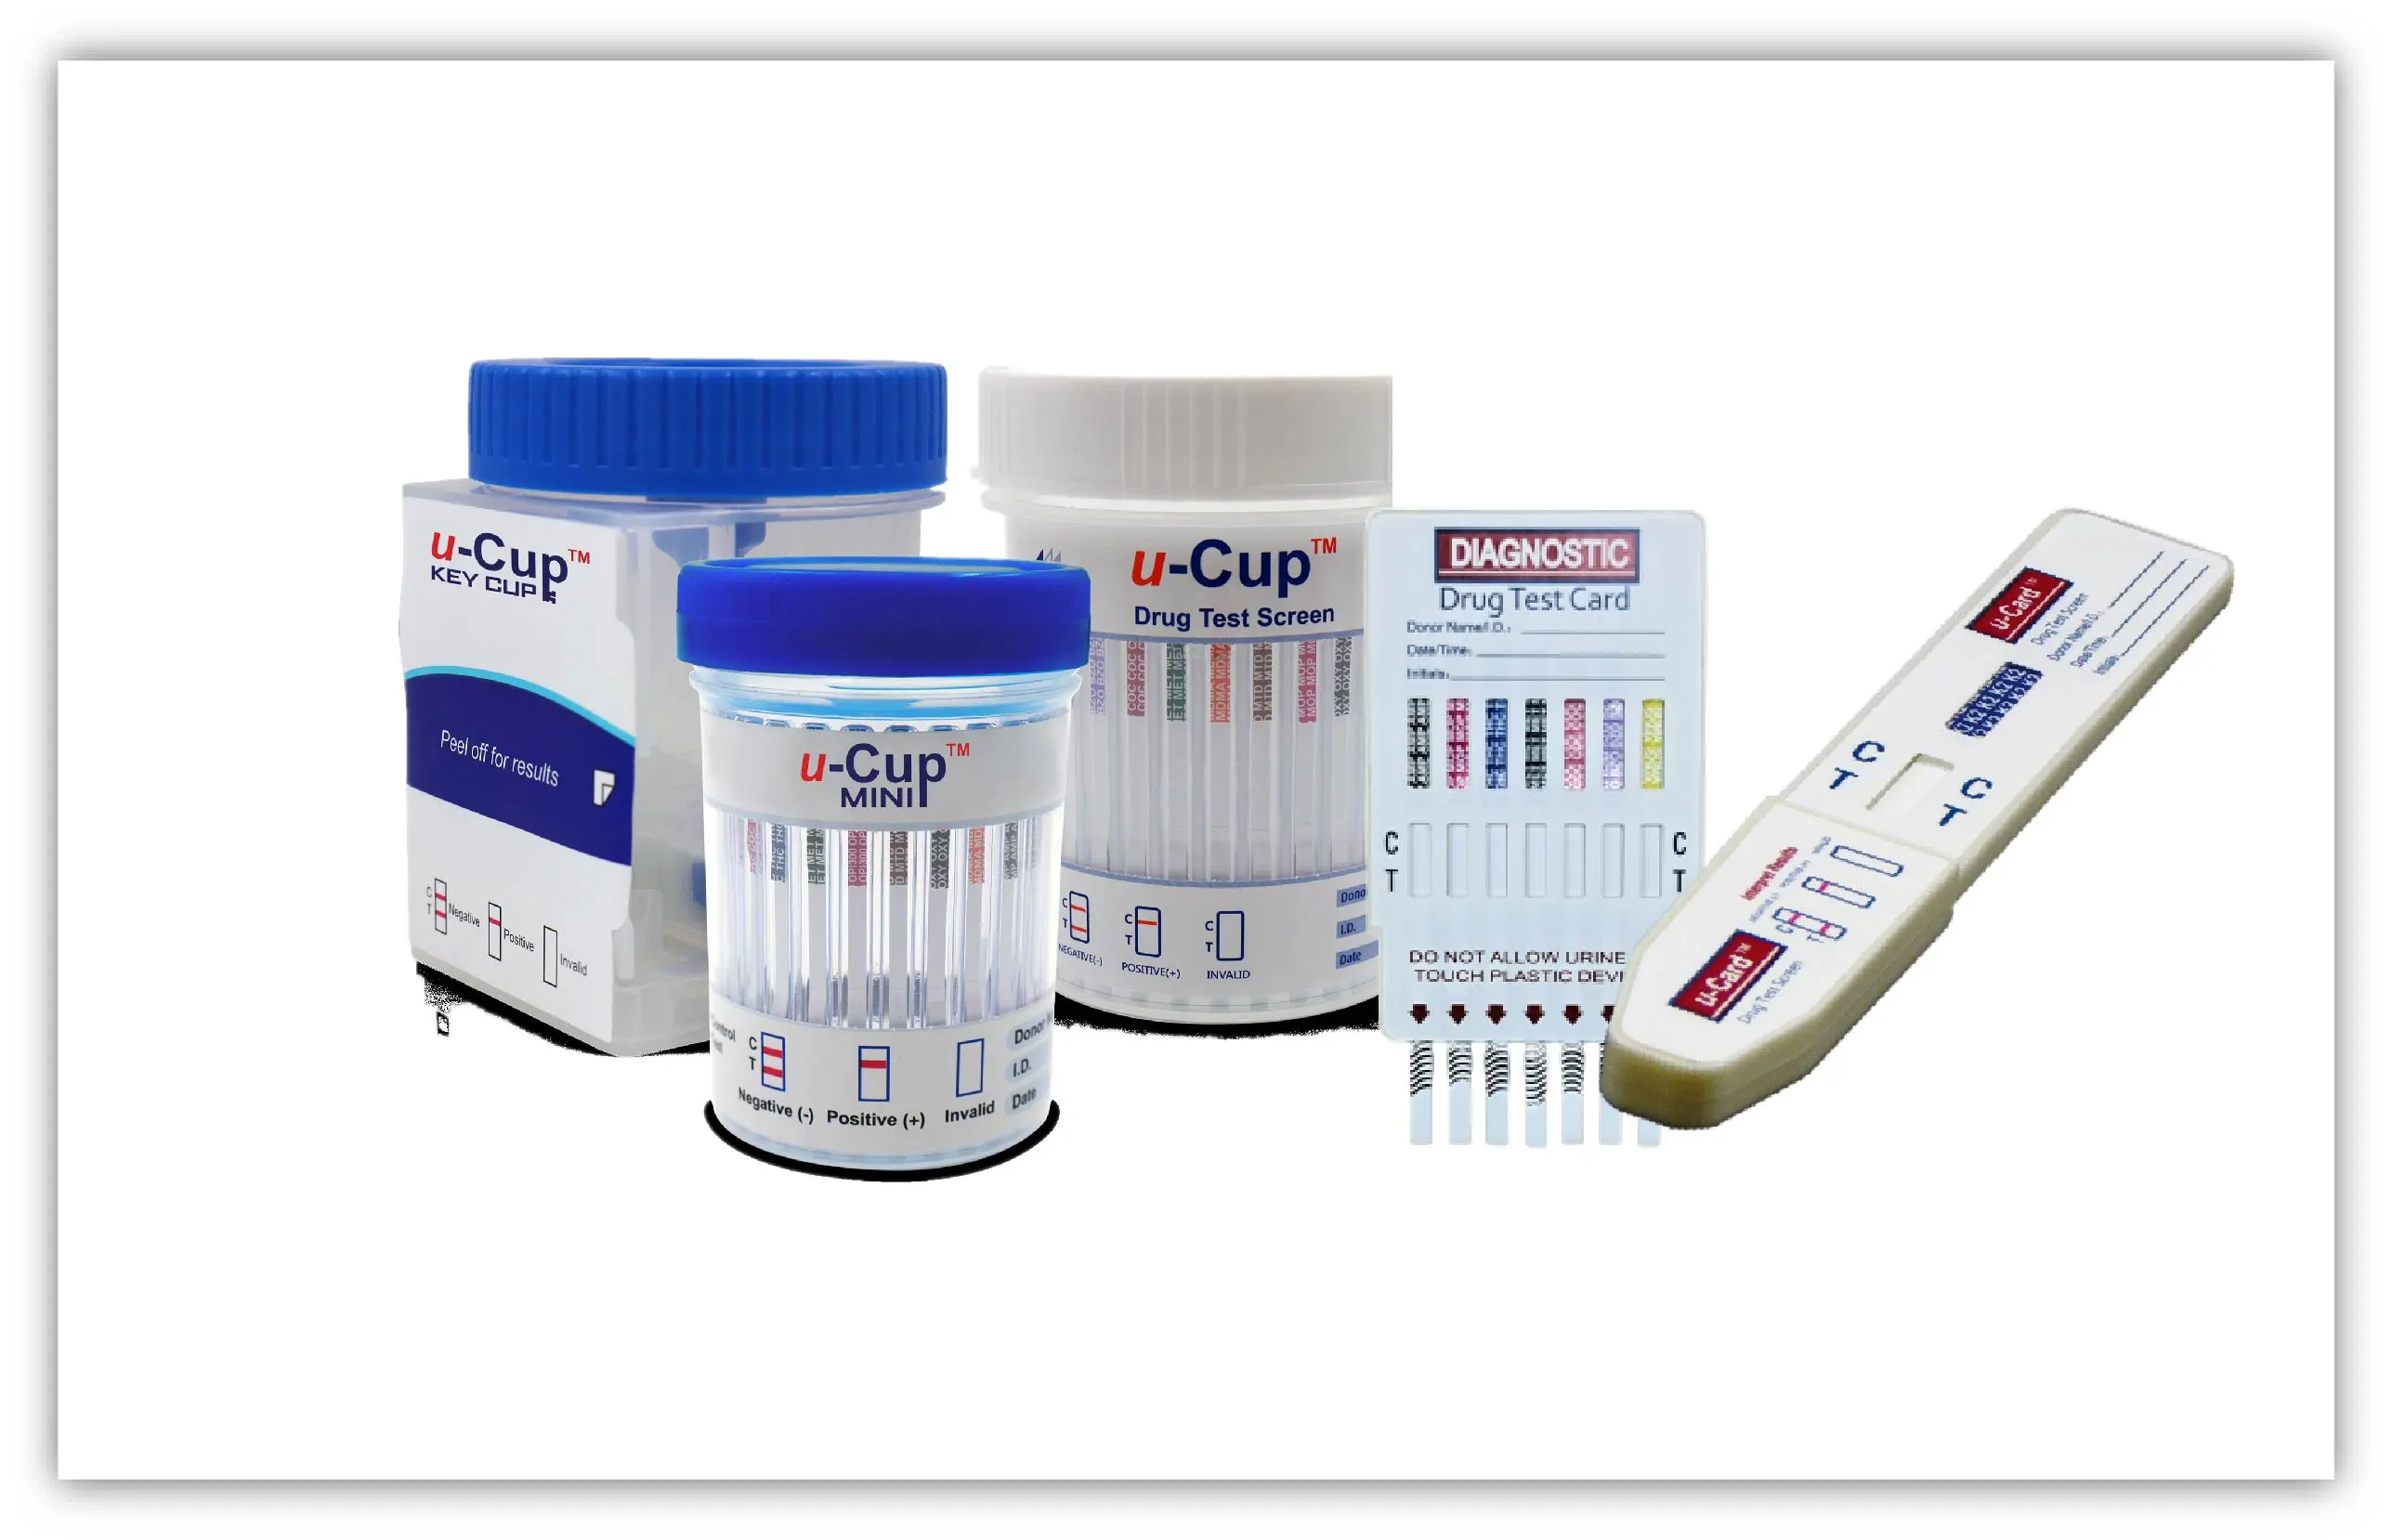 The Convenience and Accuracy of Instant View Multi-Drug of Abuse Urine Tests